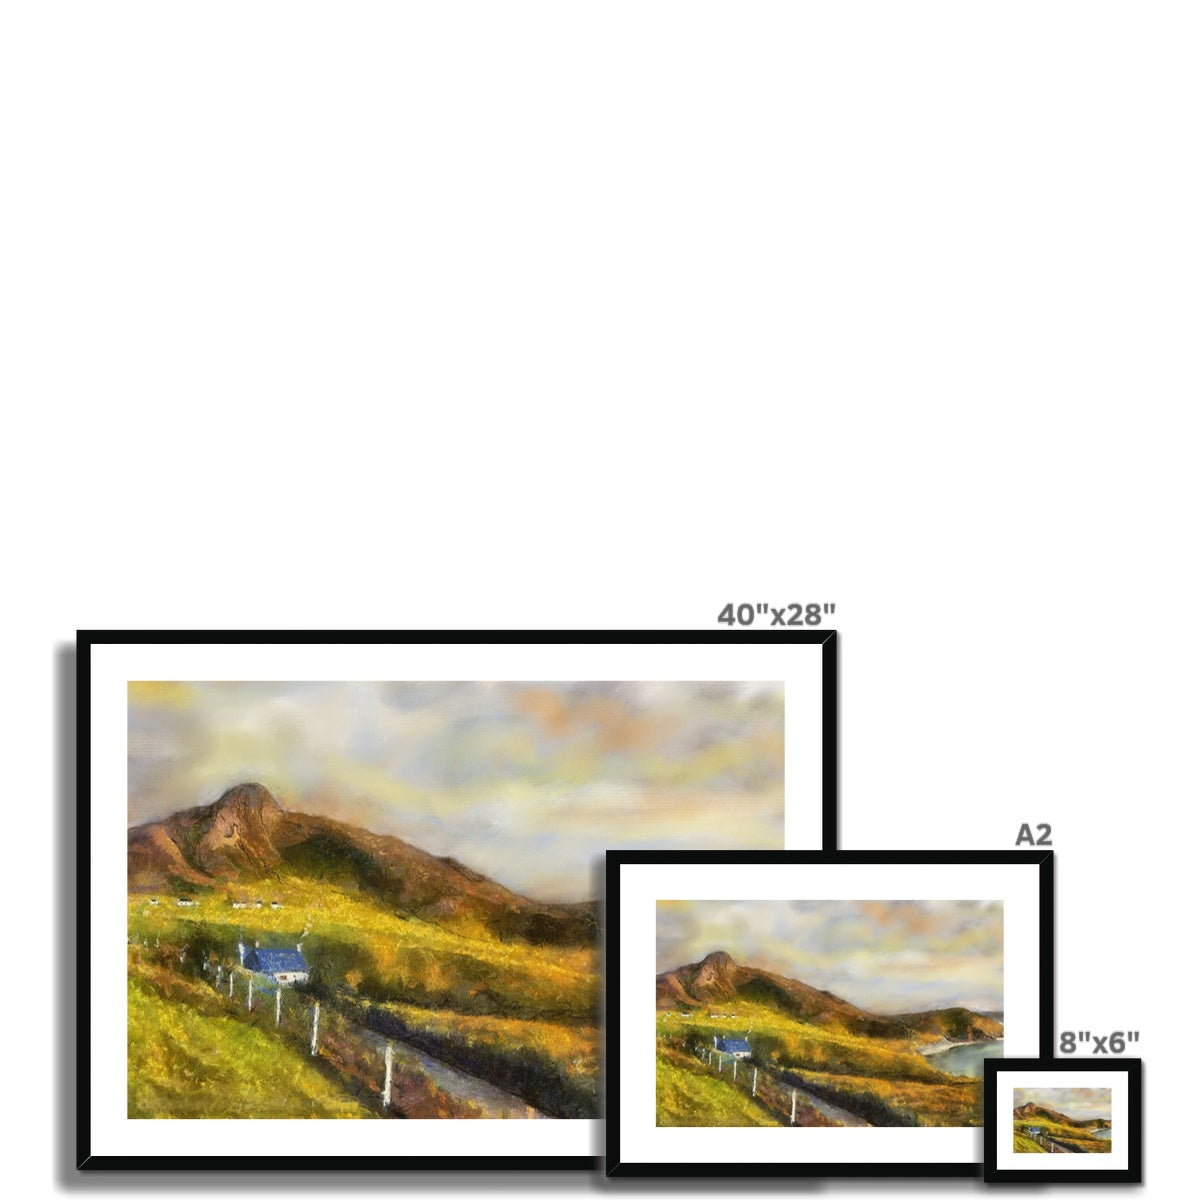 Coldbackie Painting | Framed & Mounted Prints From Scotland-Framed & Mounted Prints-Scottish Highlands & Lowlands Art Gallery-Paintings, Prints, Homeware, Art Gifts From Scotland By Scottish Artist Kevin Hunter